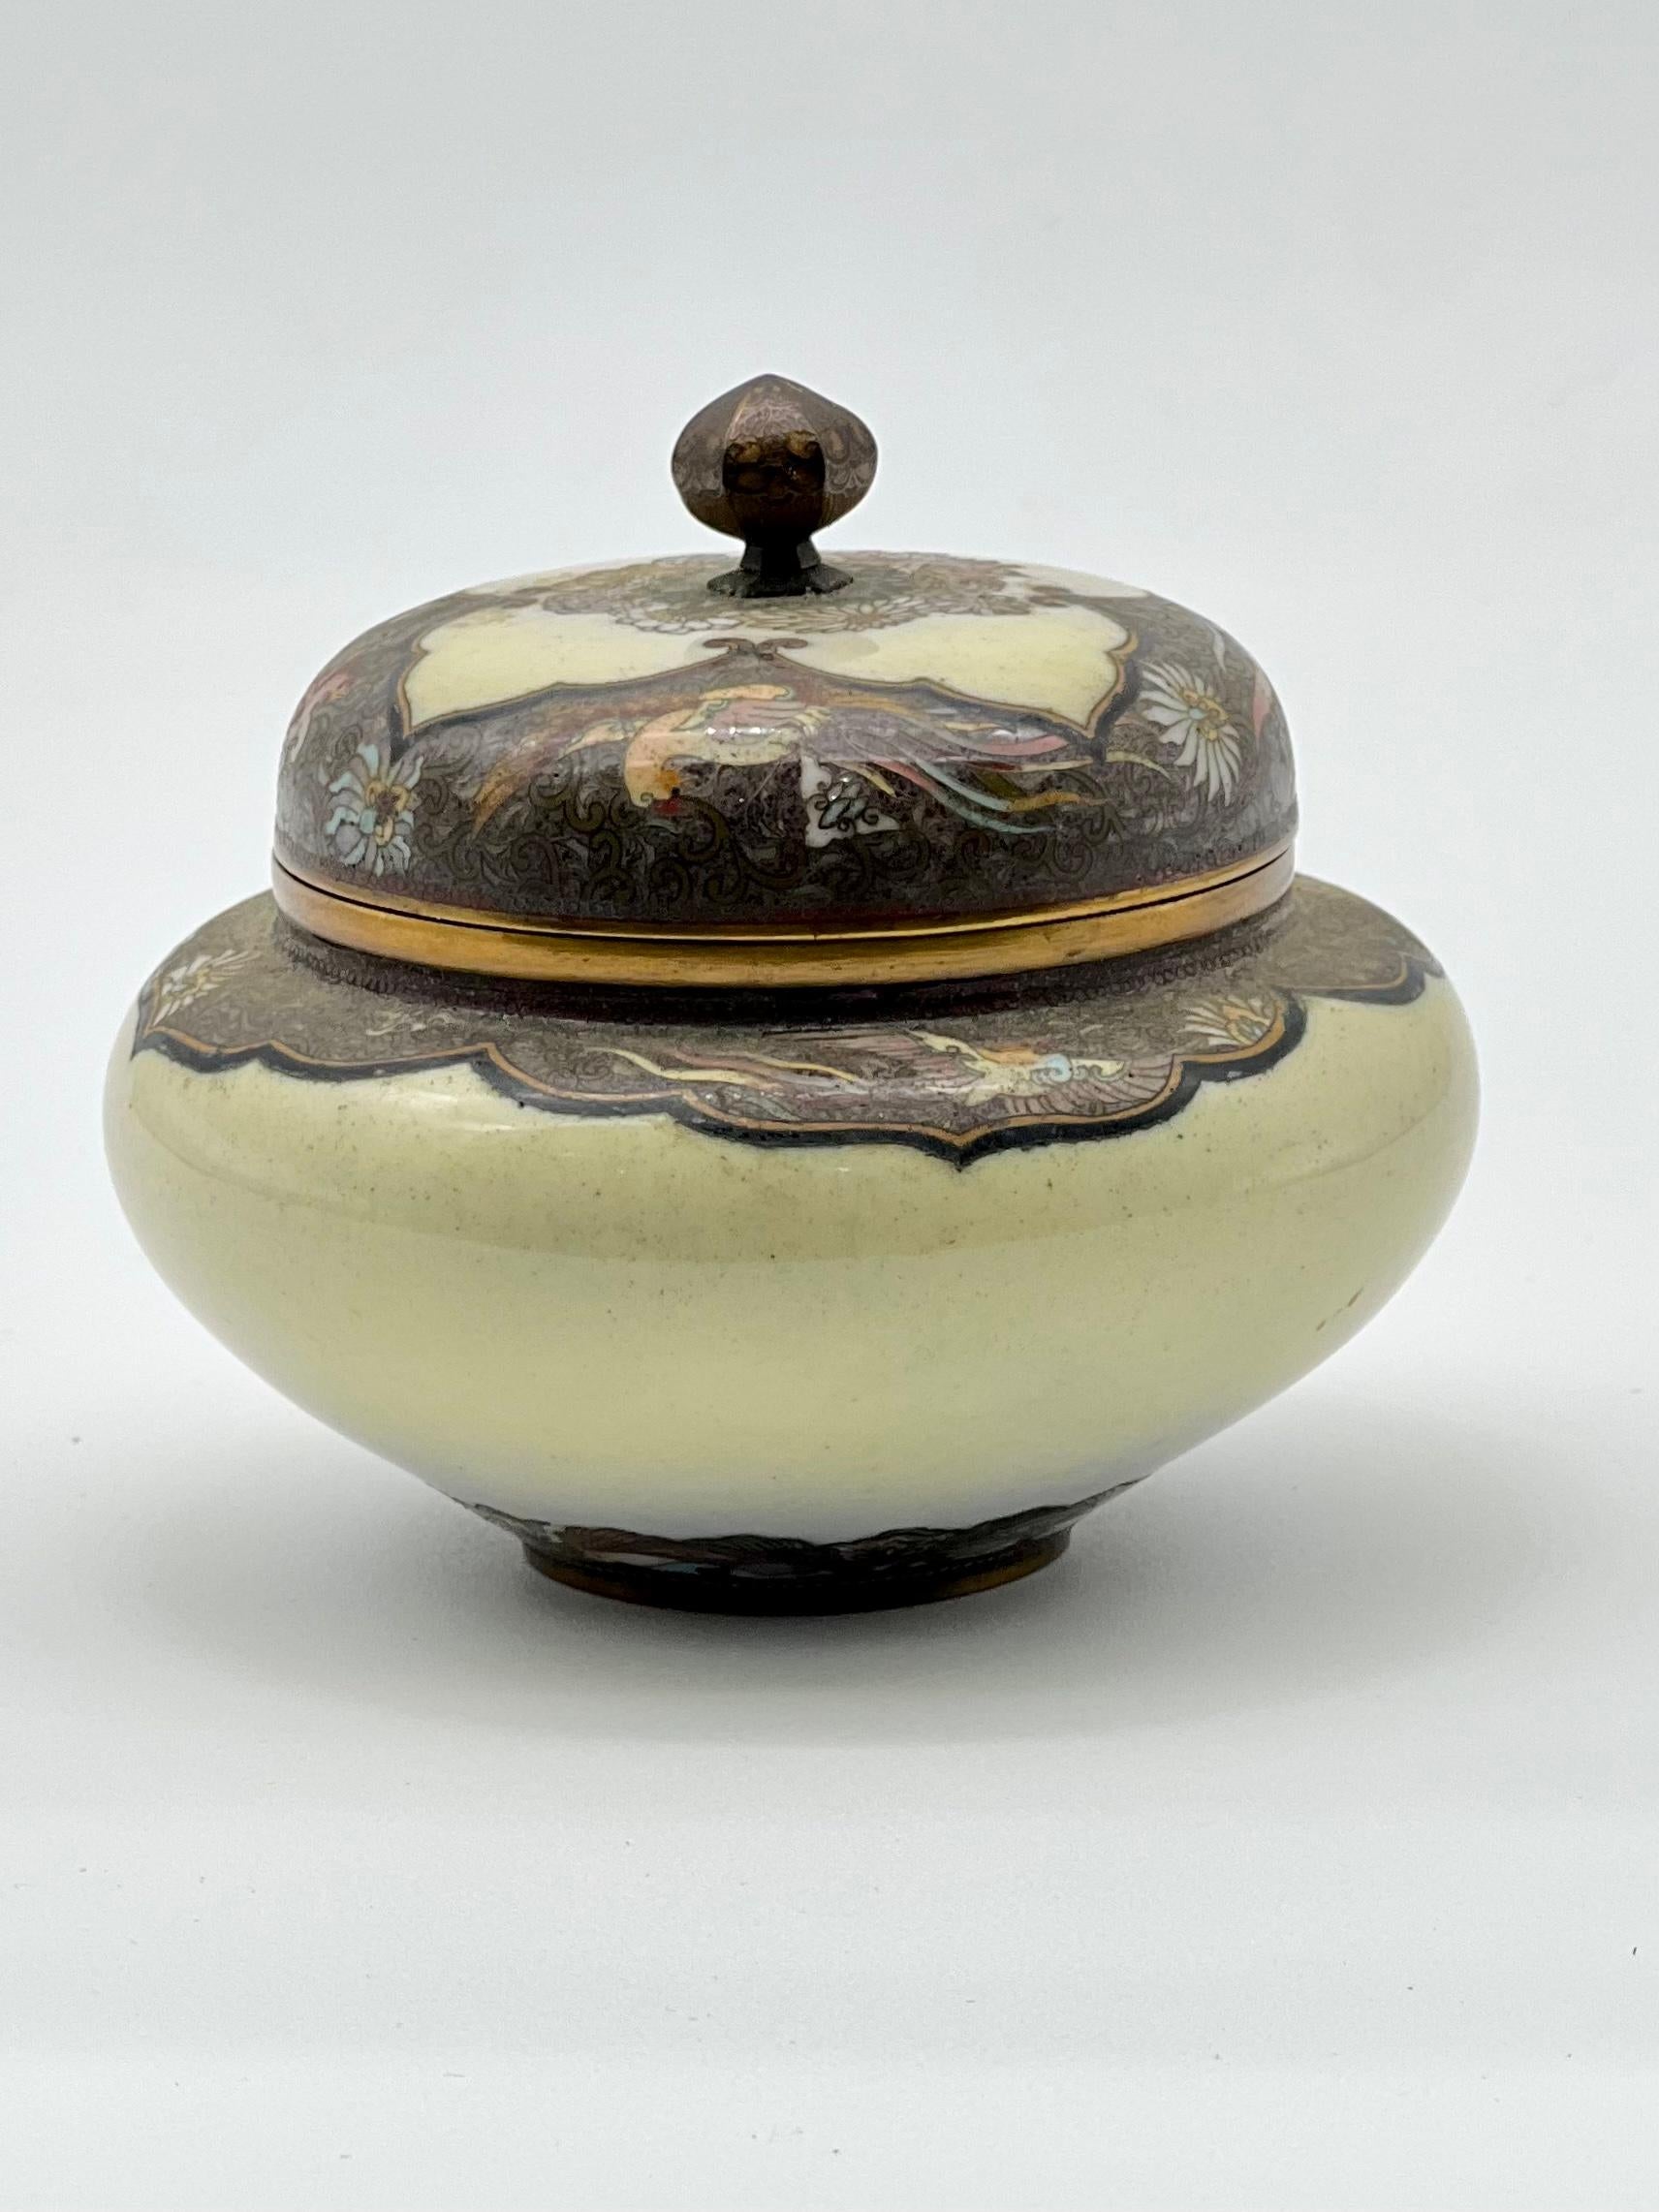 Exquisite Cloisonné Enamel Vase and Cover in the Manner of Namikawa Yasuyuki For Sale 7